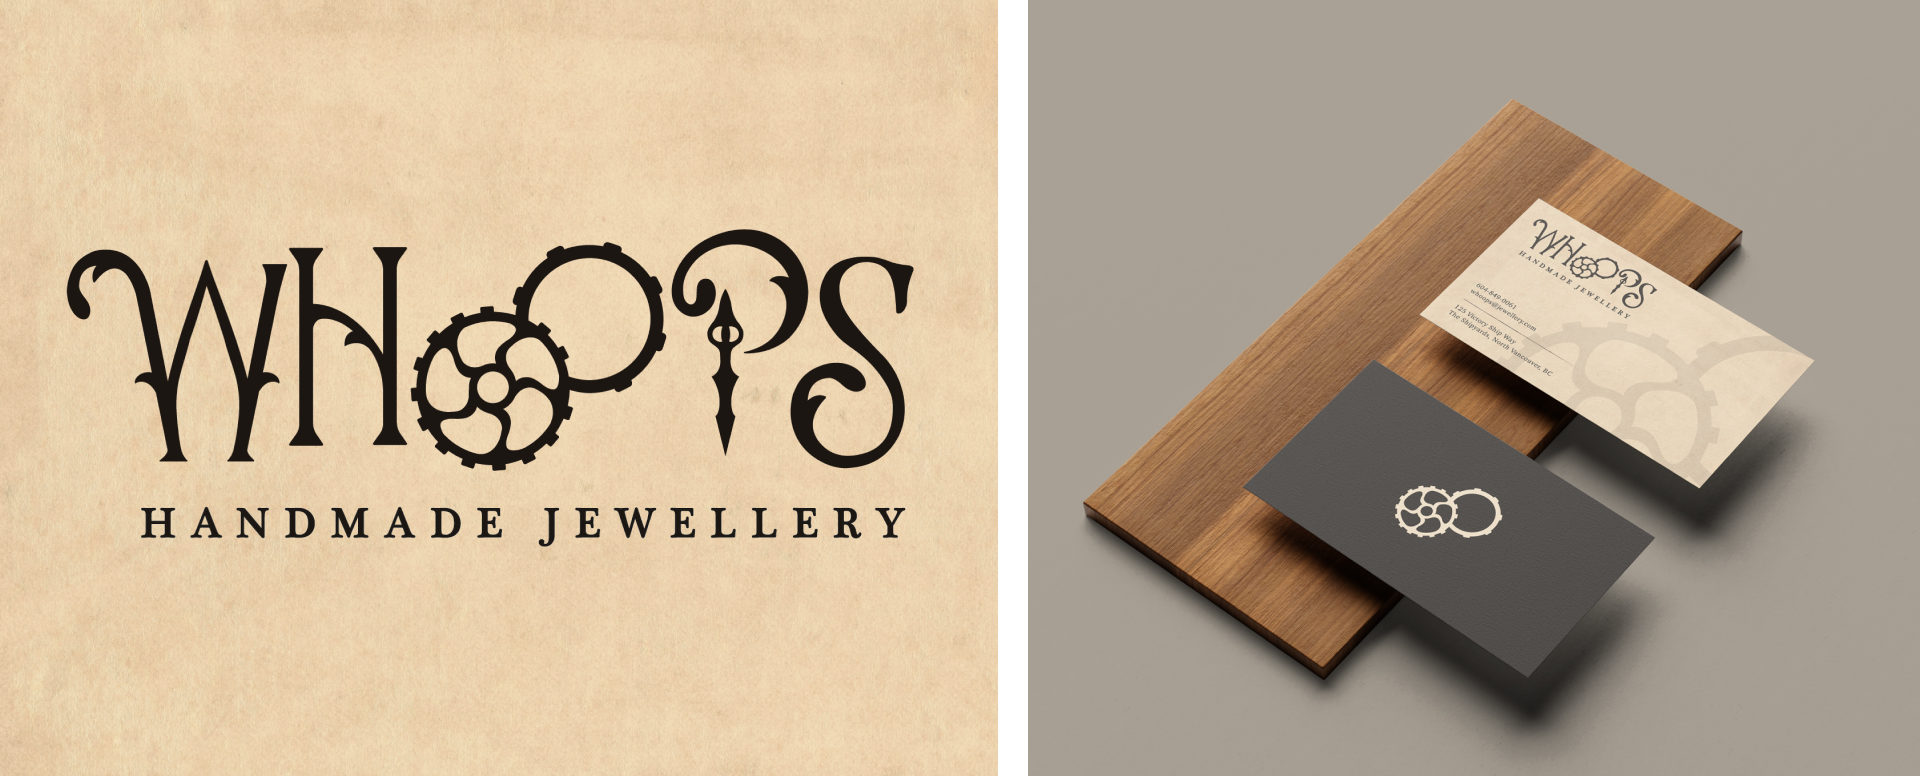 A set of 2 images, one is the logo of the brand, and one is a piece of darker wood with two business cards laid on top.